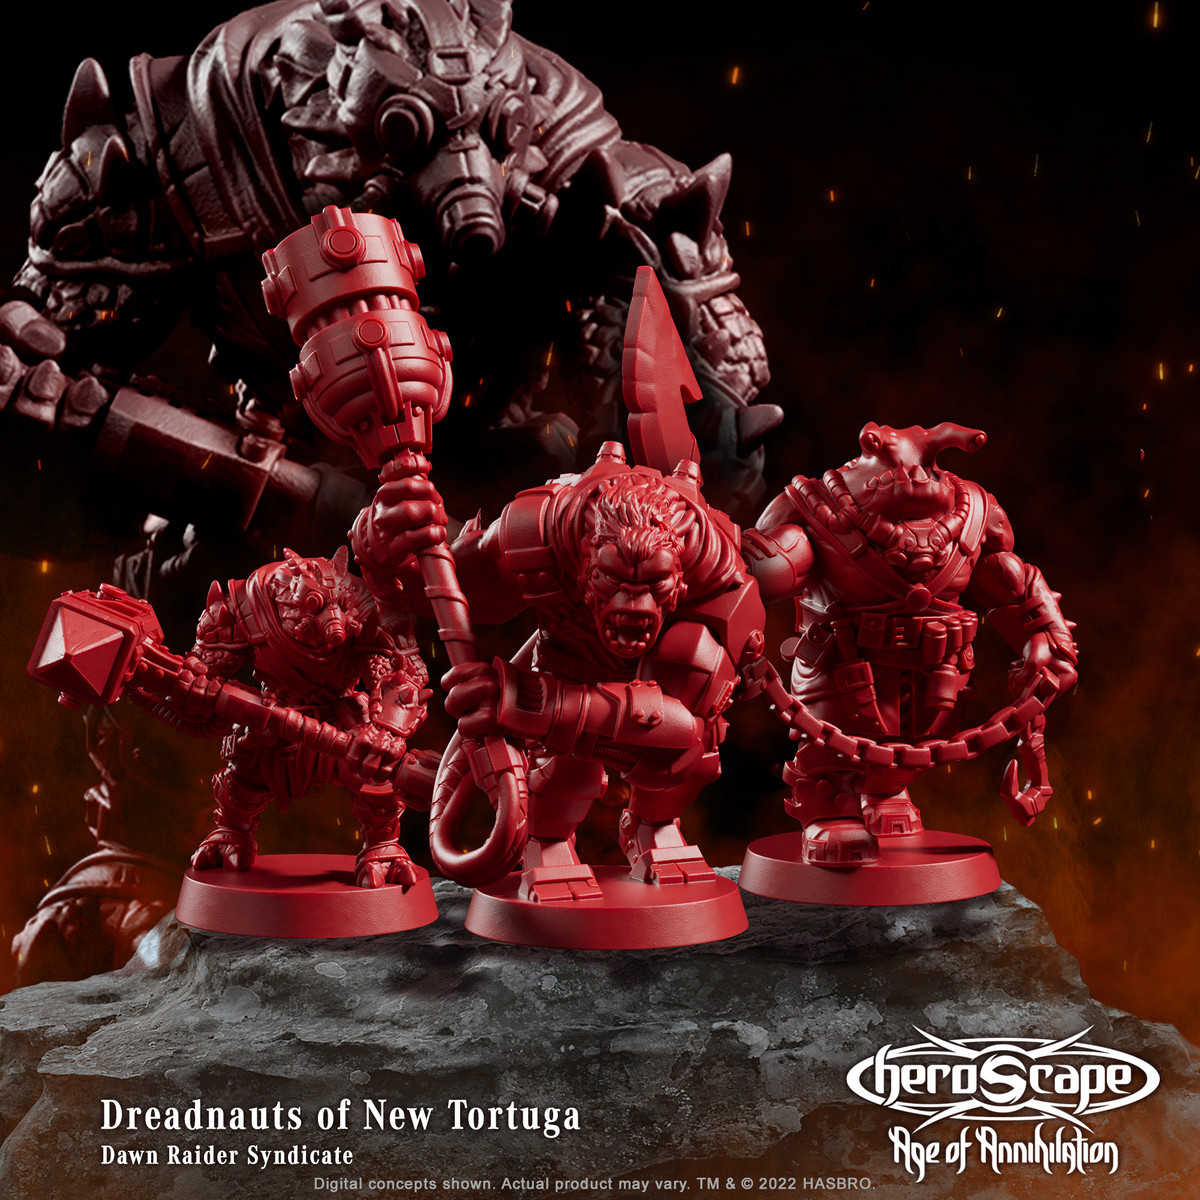 The Dreadnauts of New Tortuga, of the Dawn Raider Syndicate, are hulking brutes carrying oversized clubs and swords on chains. 